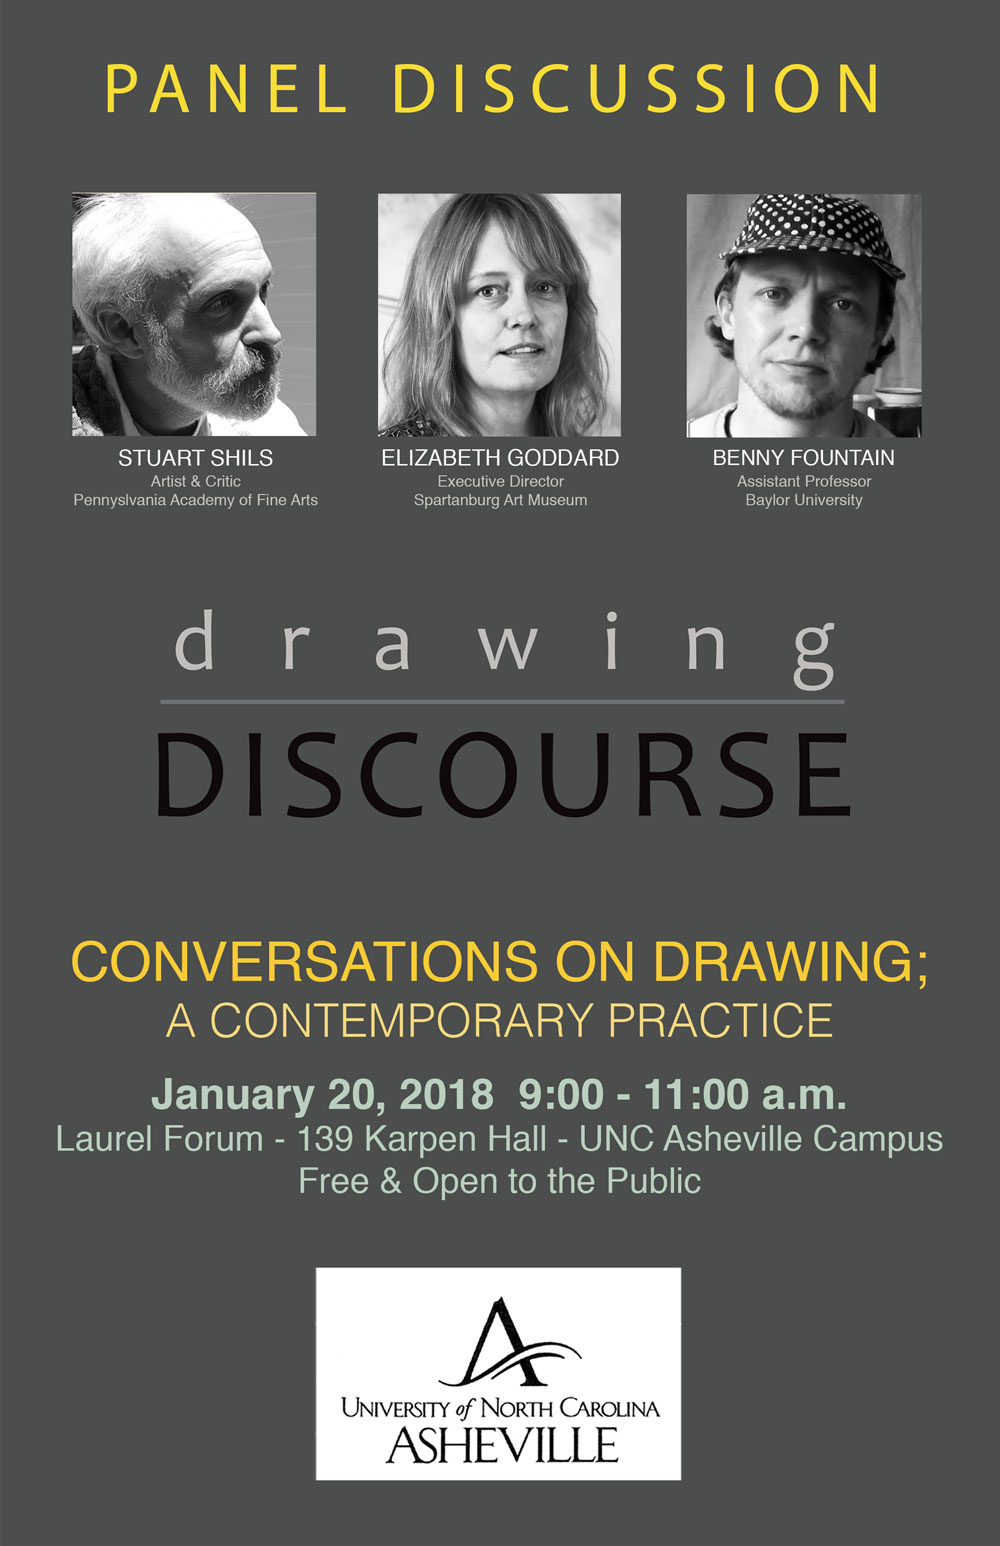 drawing discourse panel discussion poster